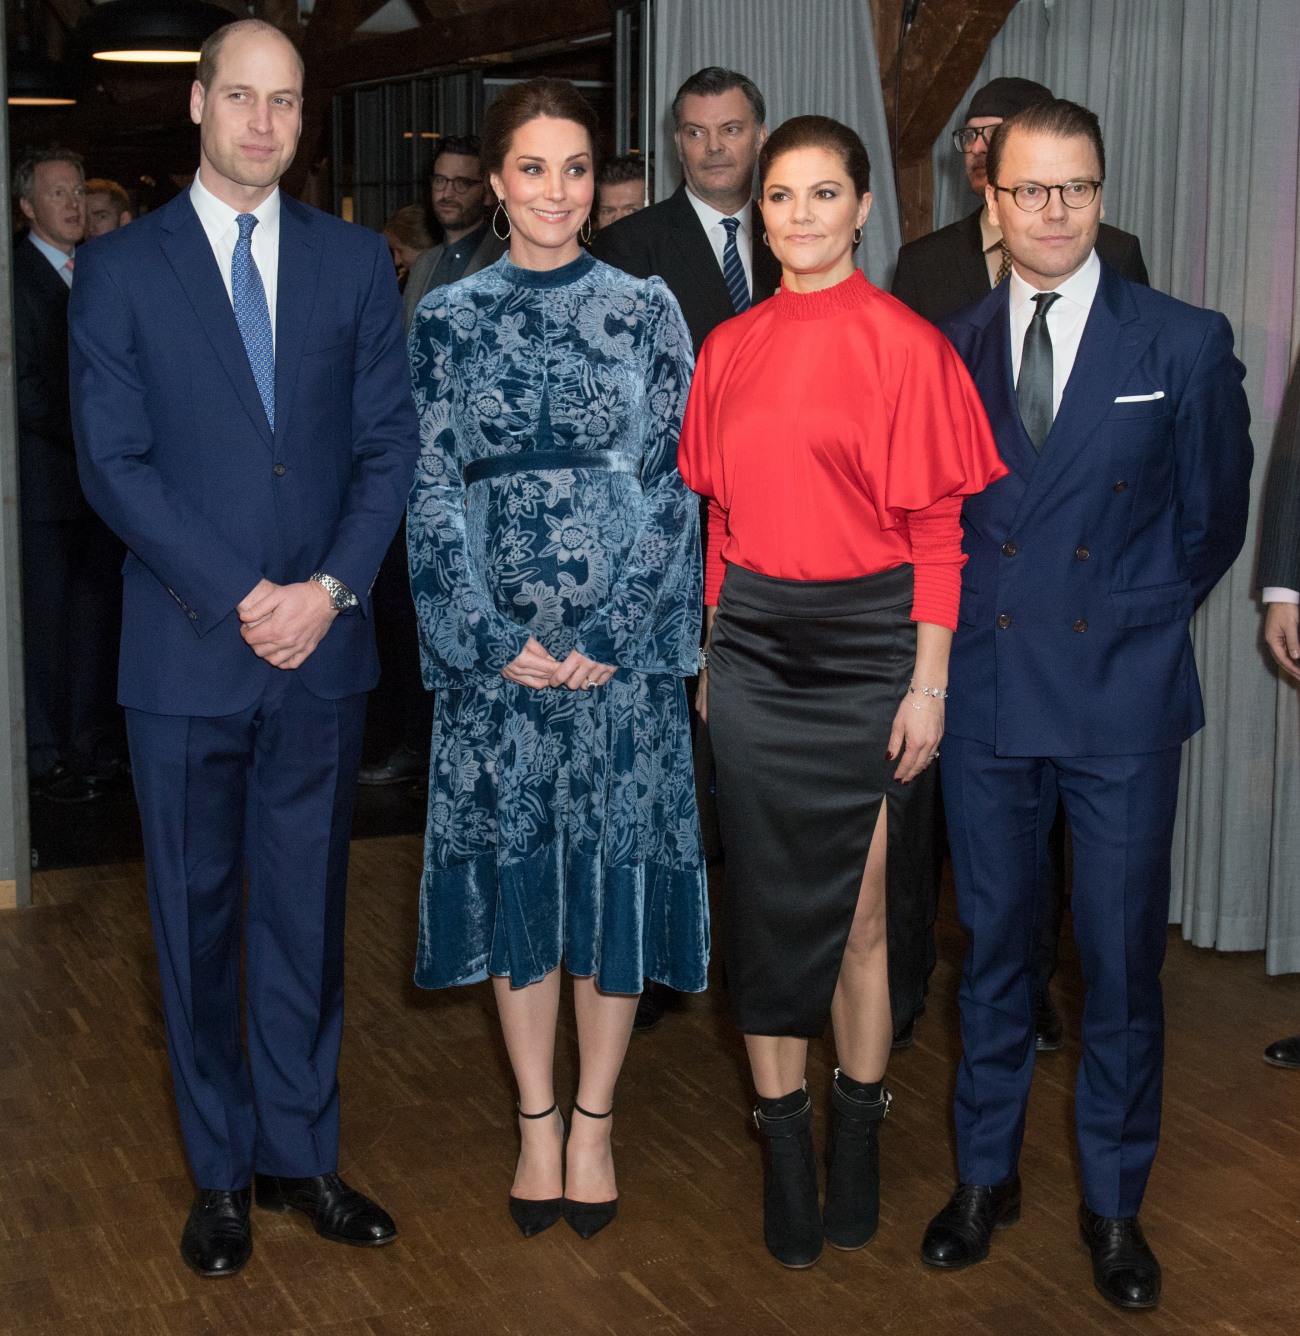 The Duke and Duchess of Cambridge, accompanied by Crown Princess Victoria and Prince Daniel, attend an event at the Fotografiska Galleries